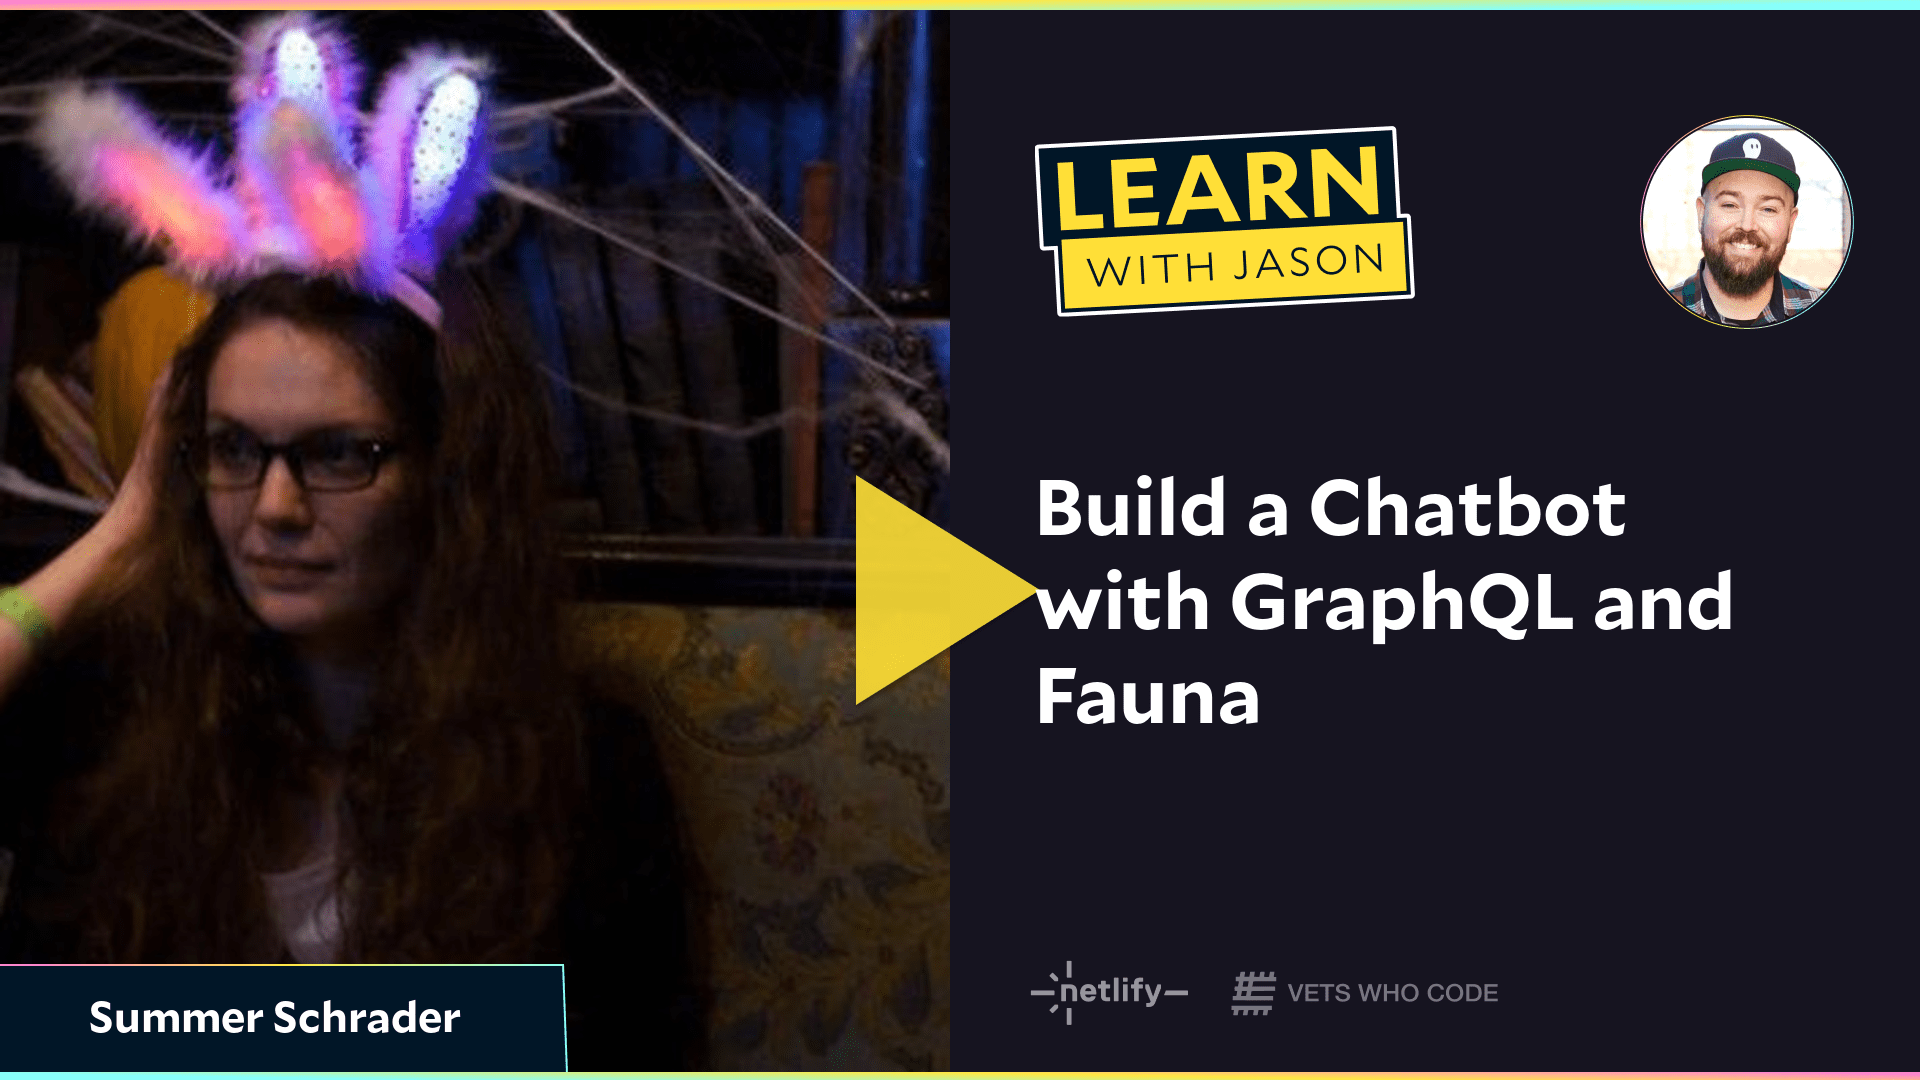 Build a Chatbot with GraphQL and Fauna (with Summer Schrader)